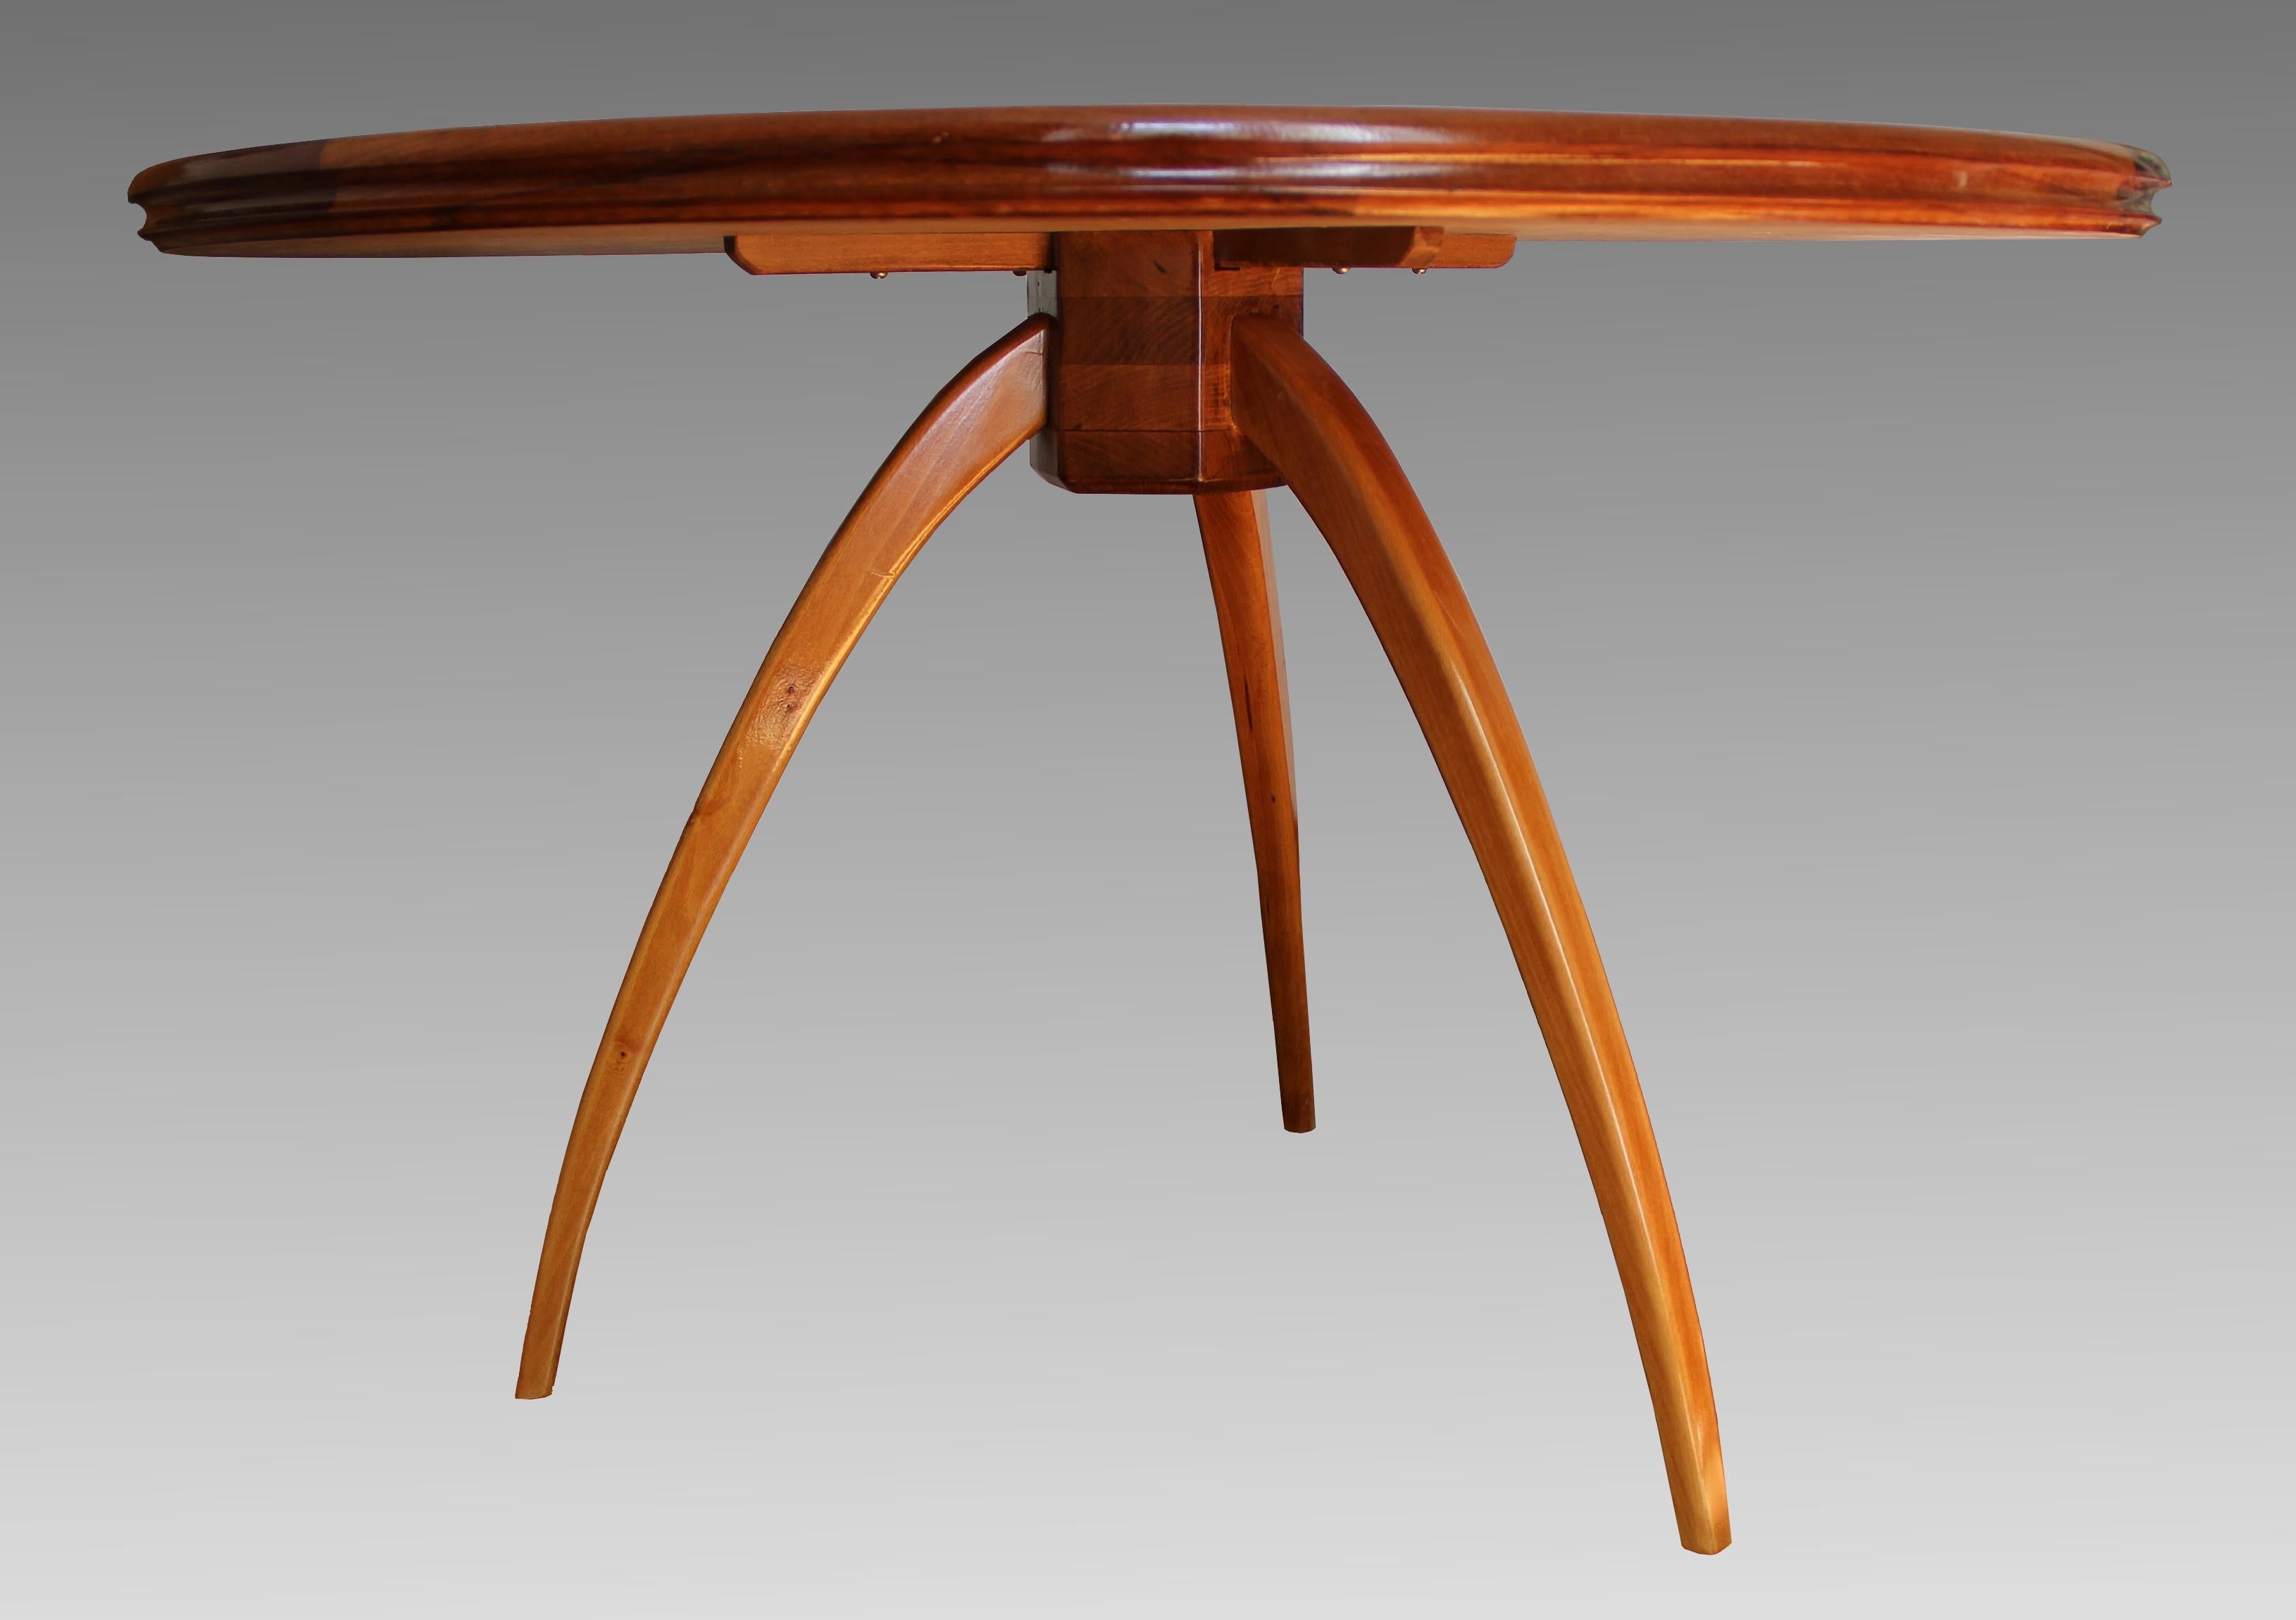 Wood Art Deco Pedestal Table in Sycamore and Blond Mahogany, France, circa 1950 For Sale